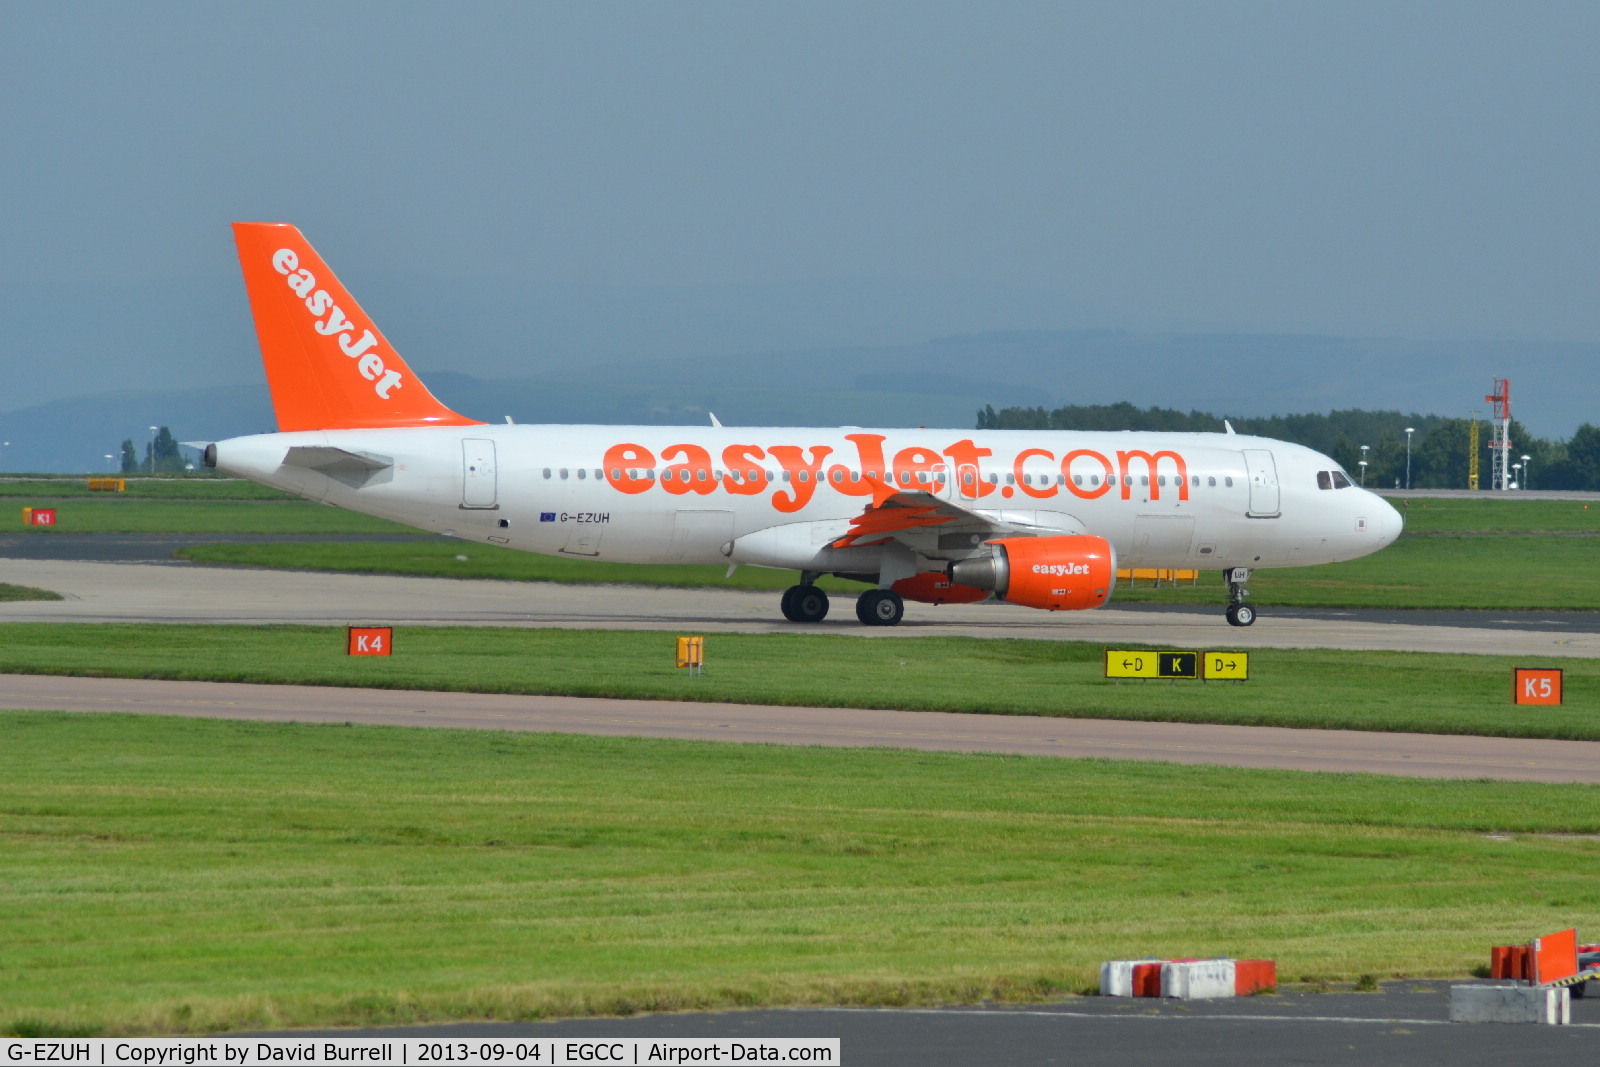 G-EZUH, 2011 Airbus A320-214 C/N 4708, EasyJet Airbus A320-214 taxiing Manchester Airport.